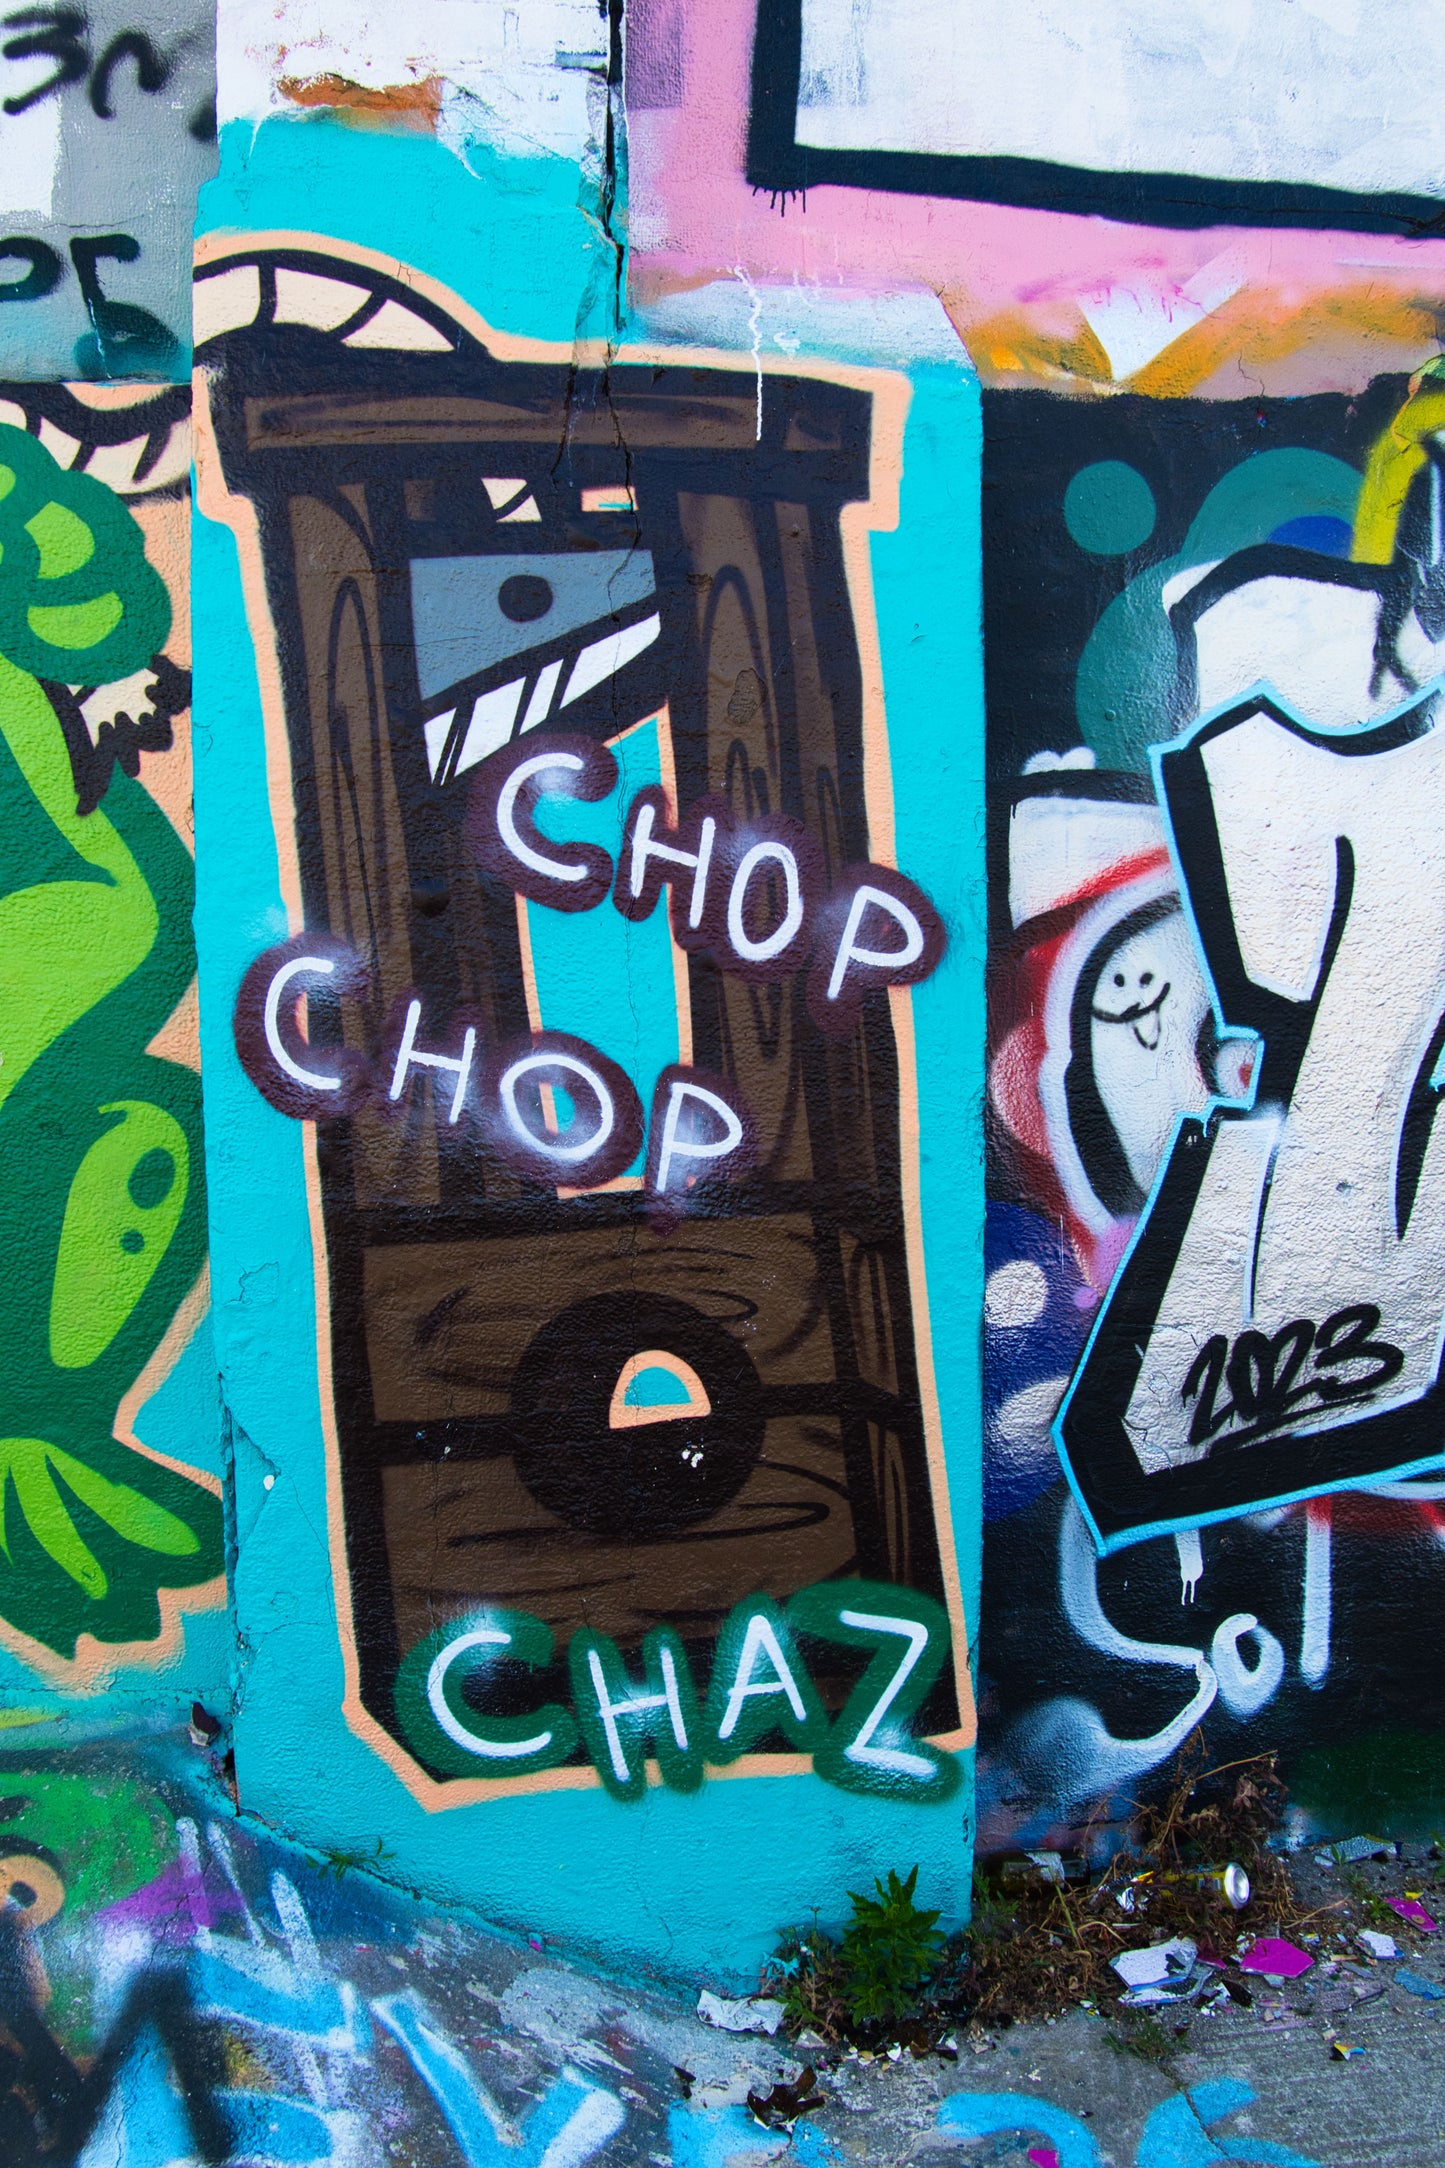 Liverpool Baltic Triangle Photo and Images -Liverpool Graffiti - Chop Chop - PTI07344 - Photo by Photographer Martin Fisher - Picture The Image